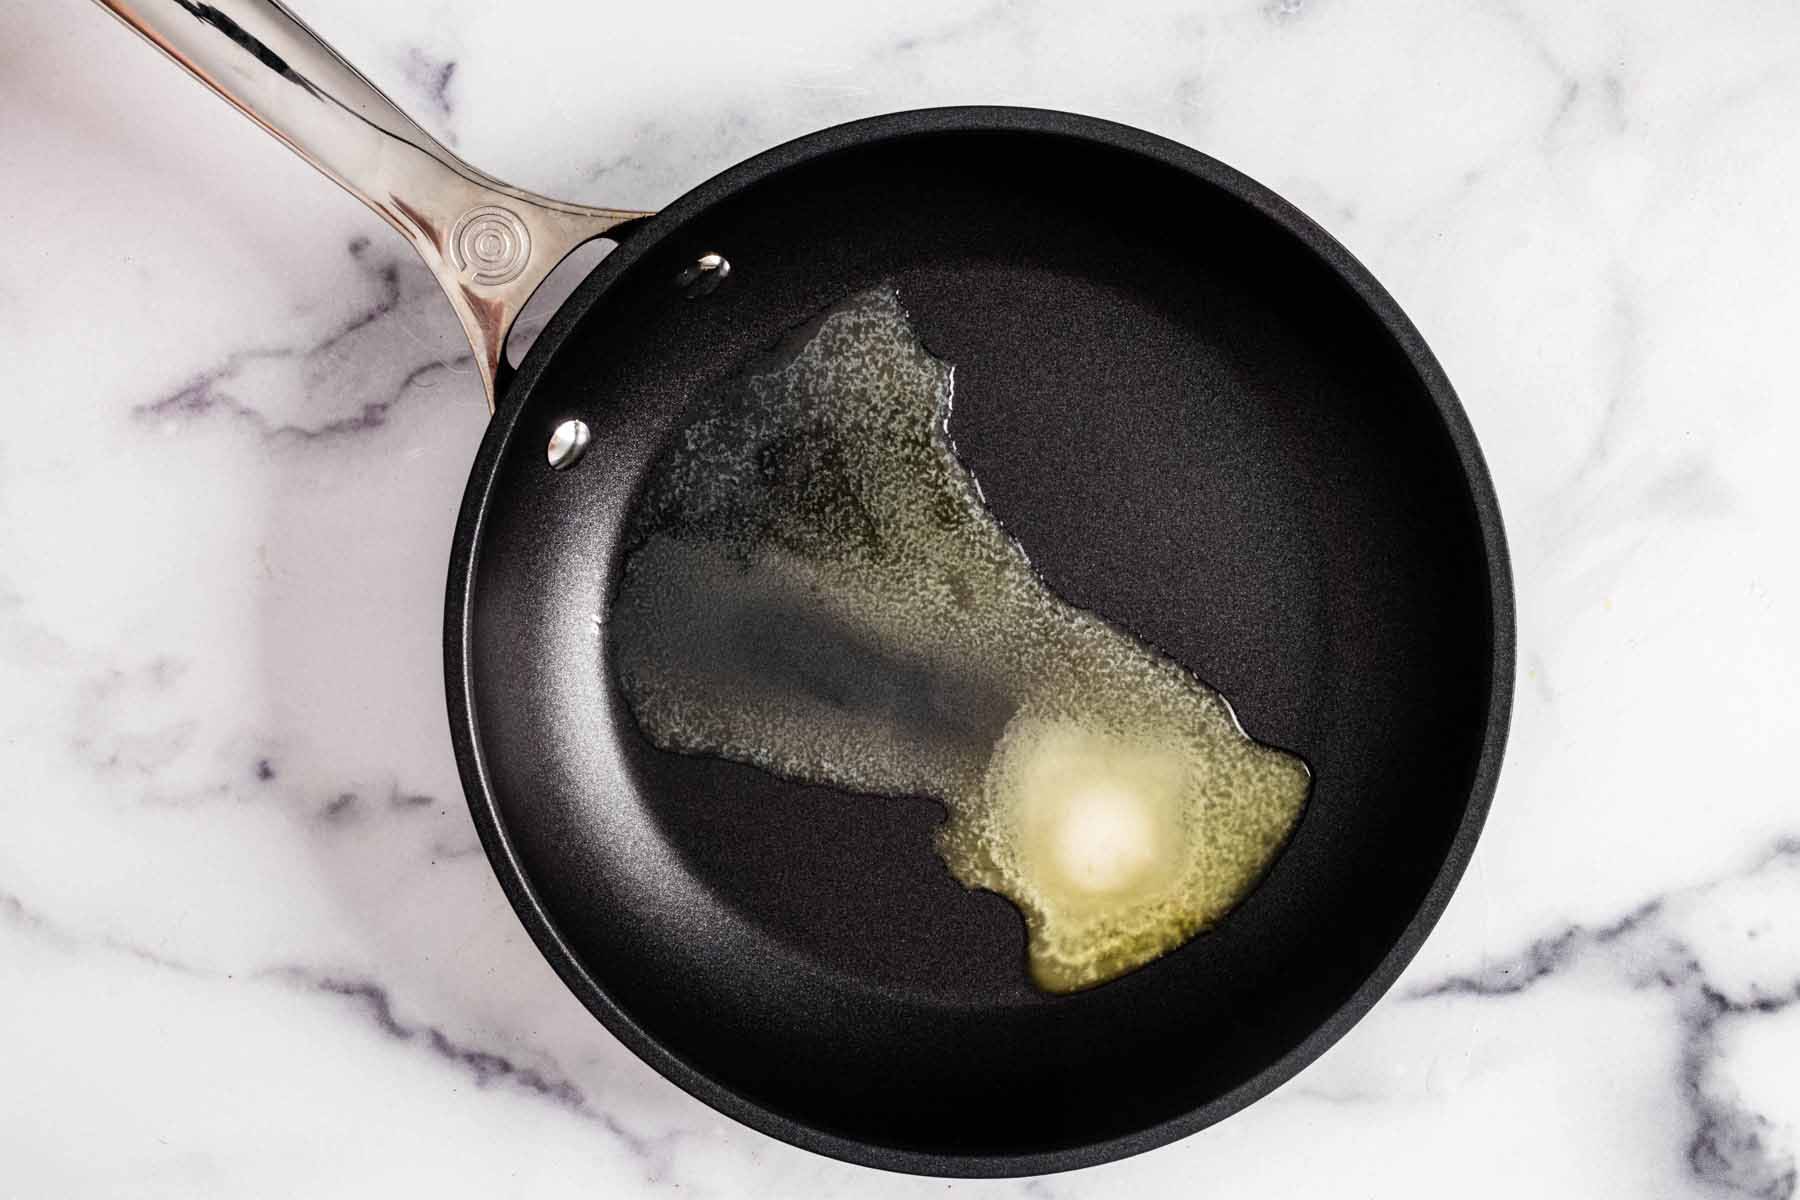 Butter melting in a small skillet.